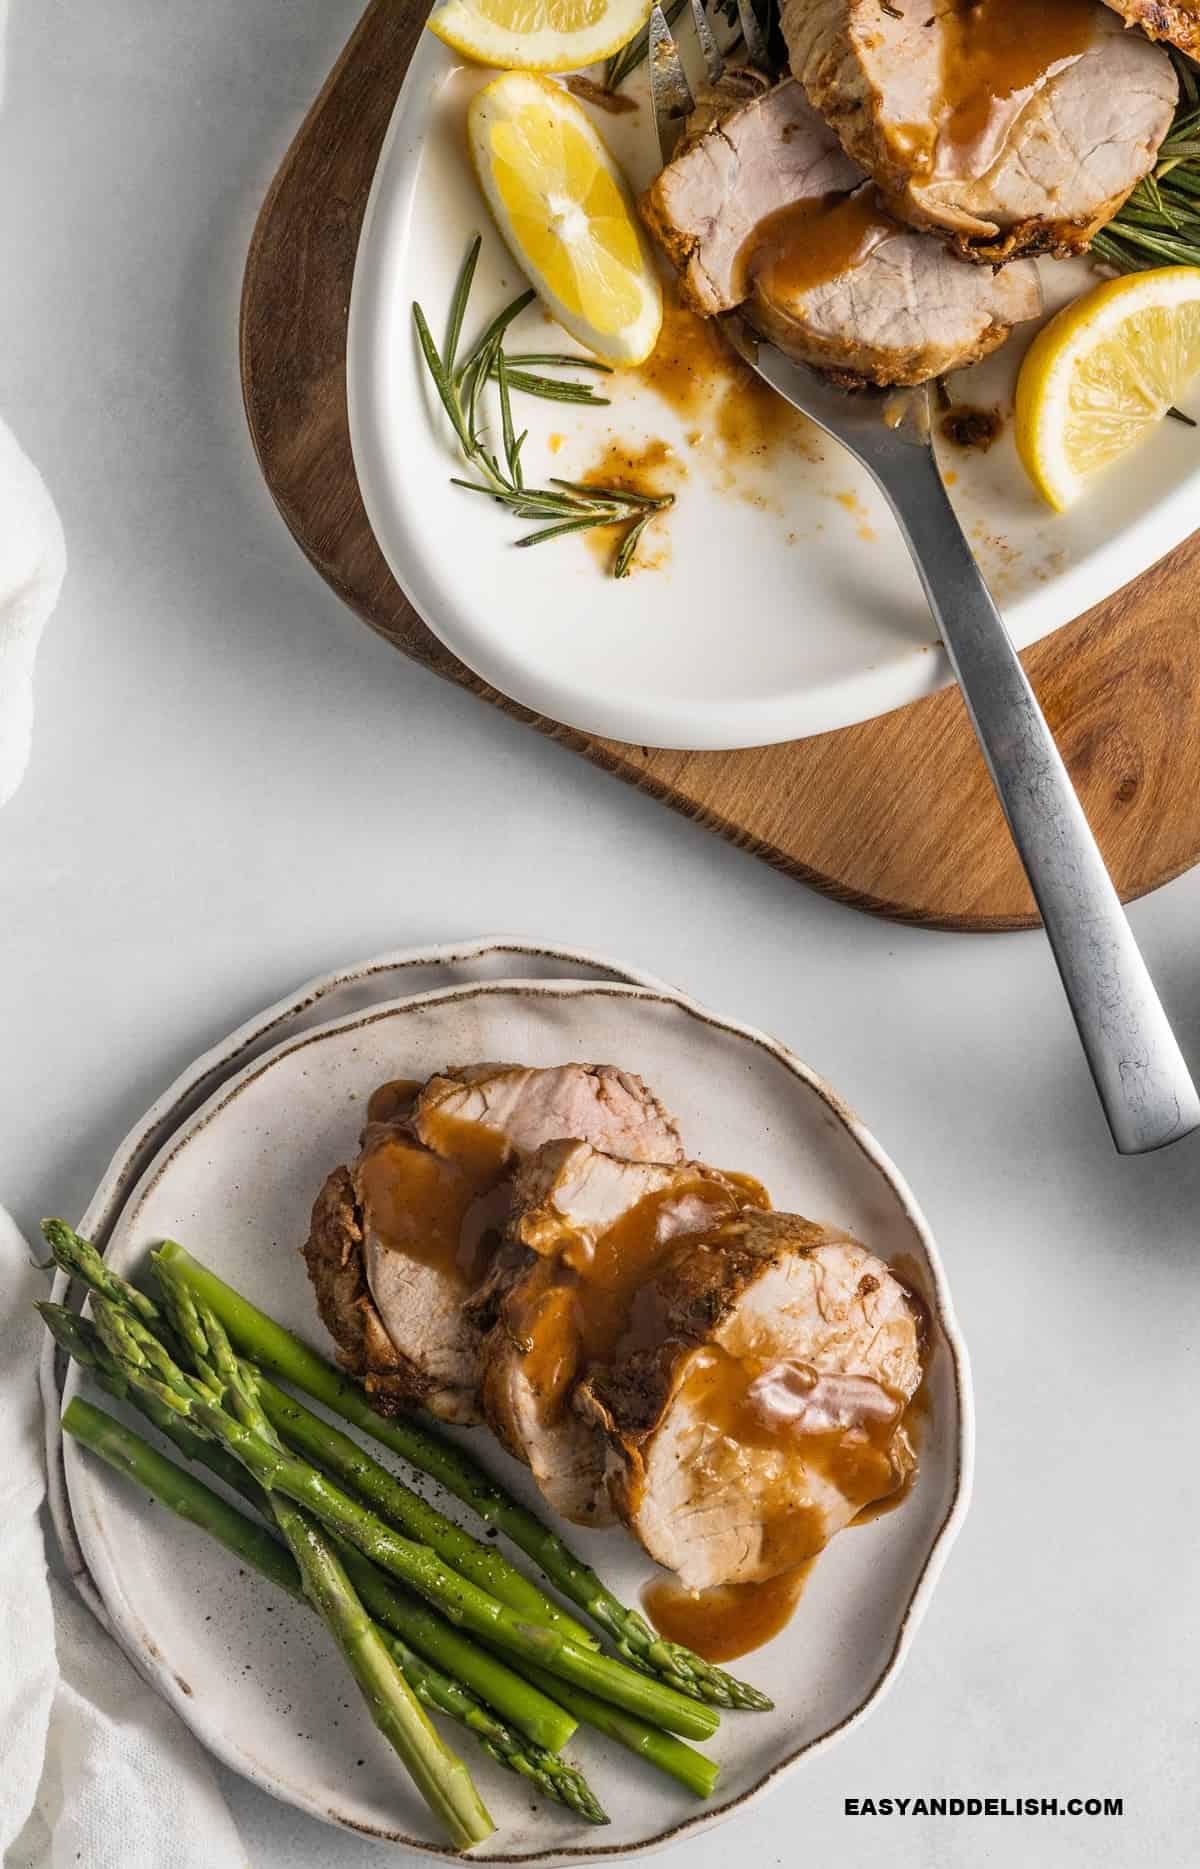 Sliced pork tenderloin with wine sauce on a plate served with asparagus and a platter in the background.